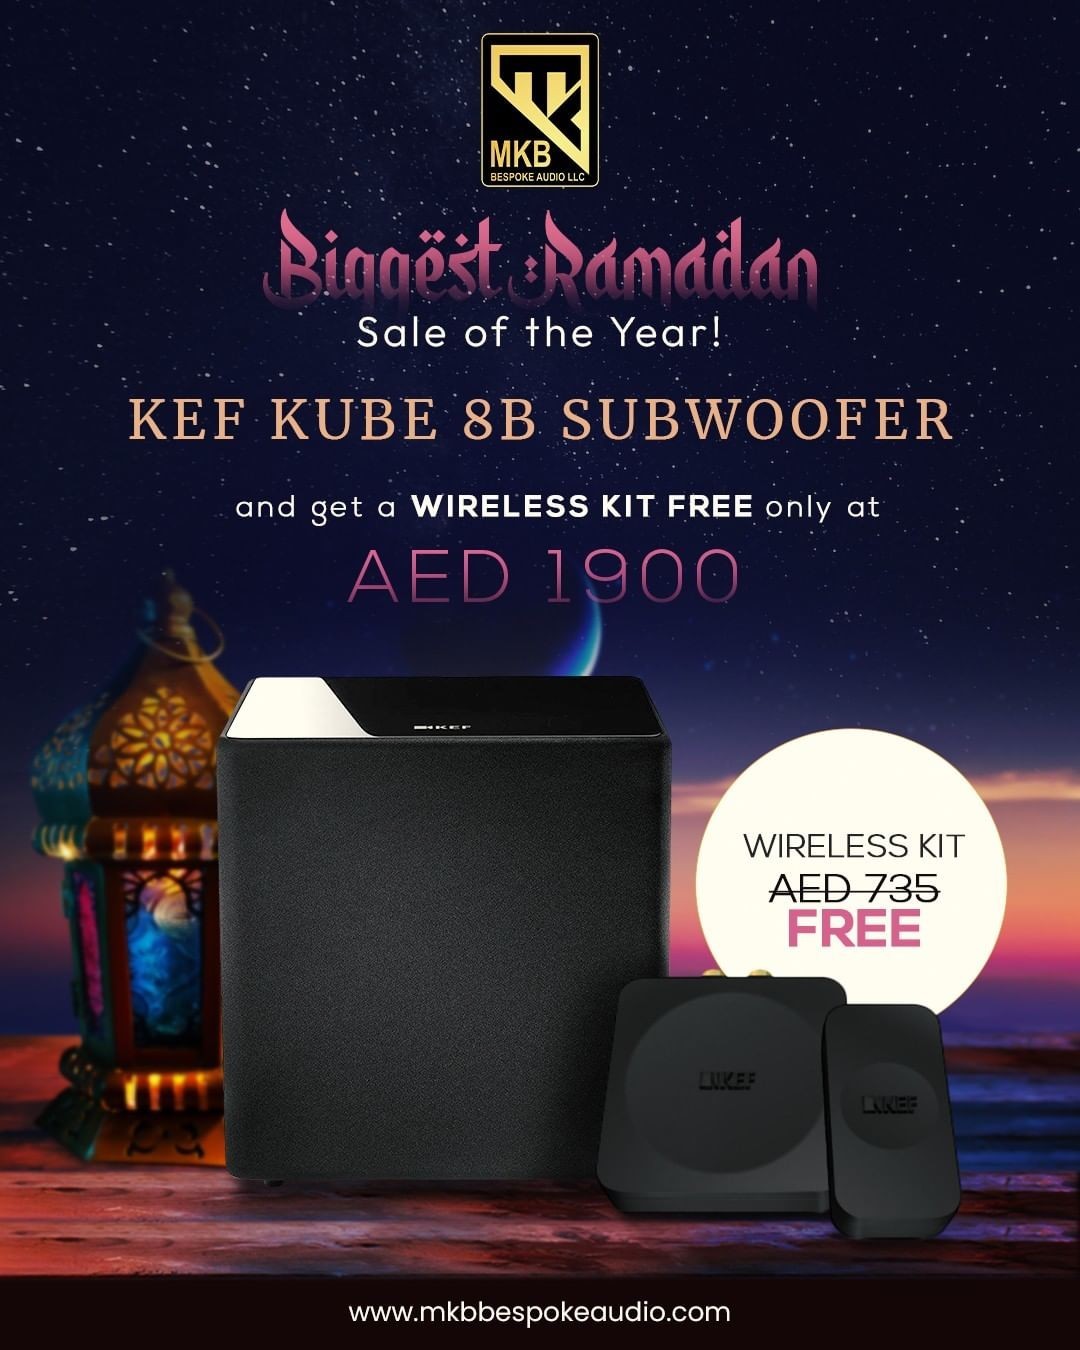 Order KEF KUBE 8b SUBWOOFER and get a WIRELESS KIT FREE only at AED 1900